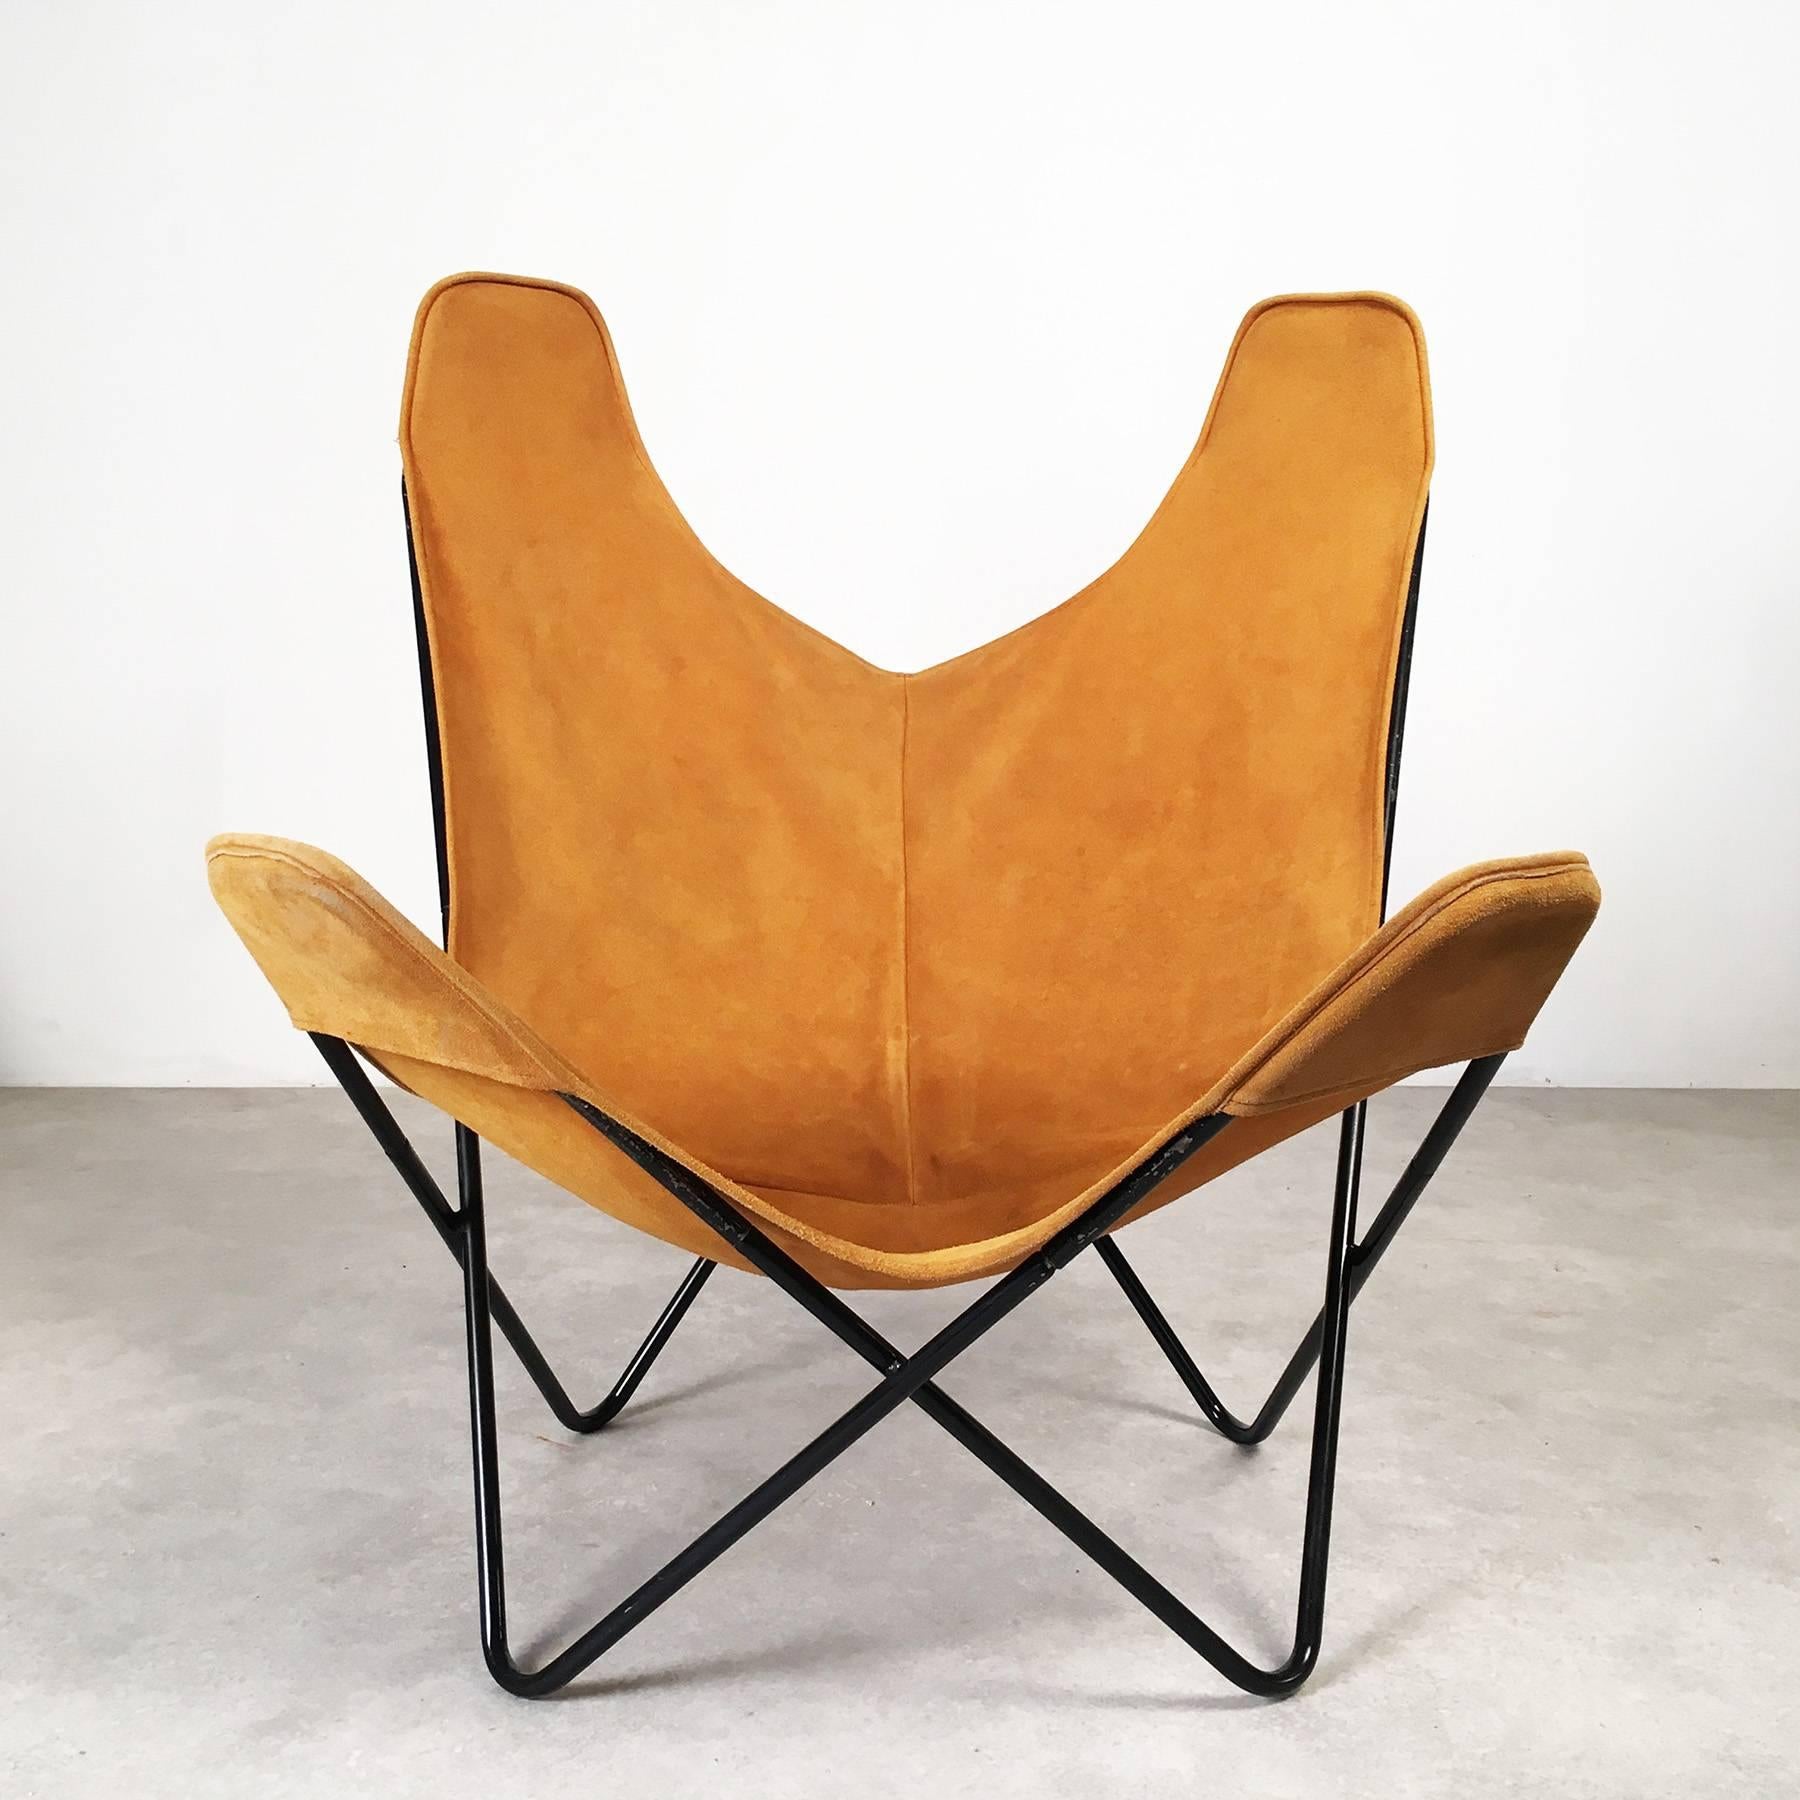 Butterfly chair, designed in 1939 by Jorge Hardoy-Ferrari. This chair is one of the best-known icons of 20th century furniture design. The chair is spacious, light weight, and surprisingly comfortable.
The offered piece is a 1950s original from